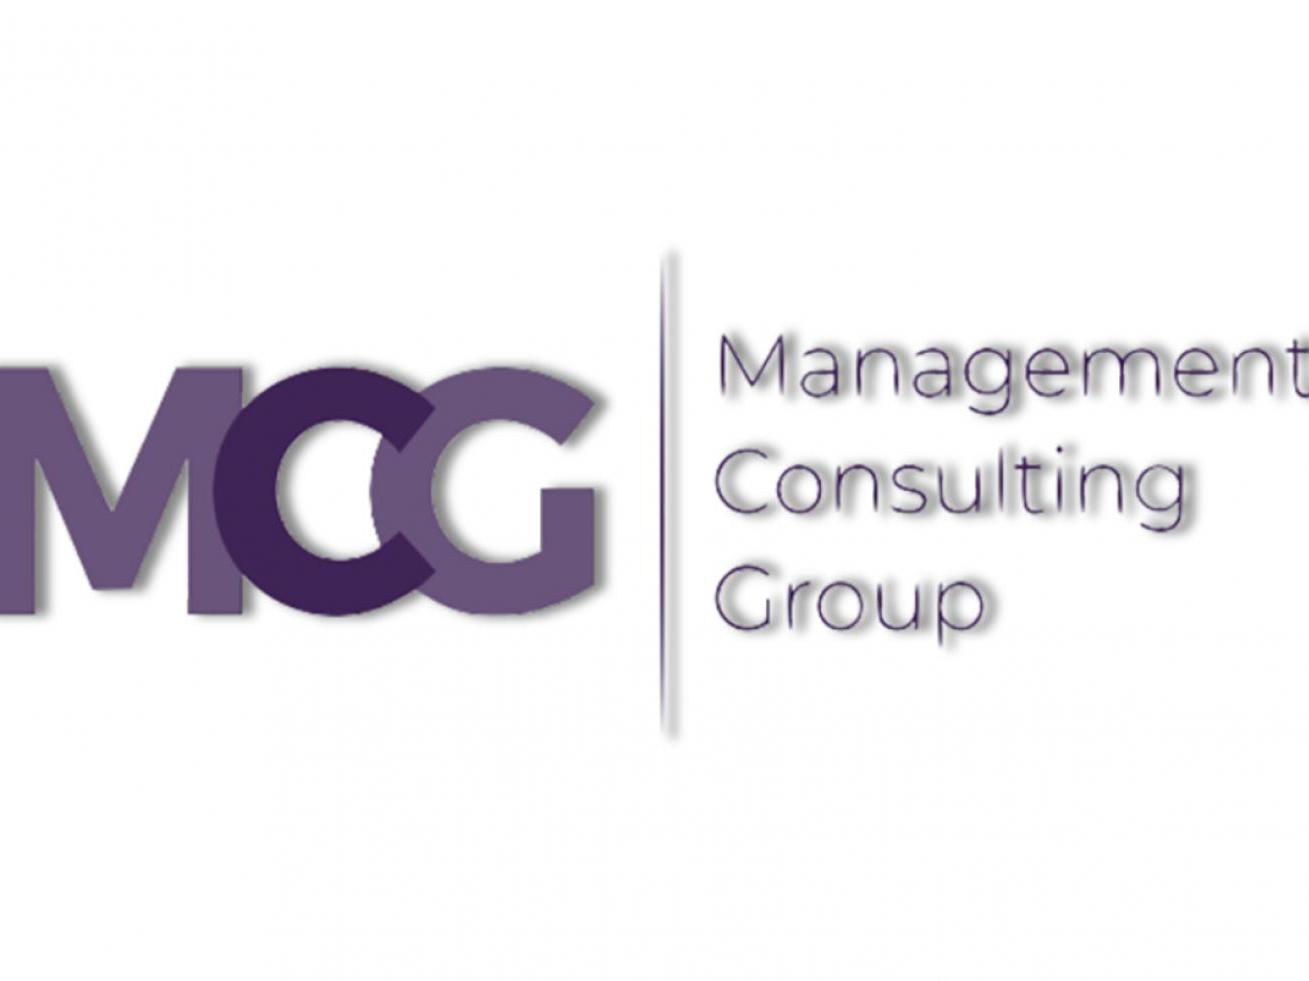 Management Consulting Group logo